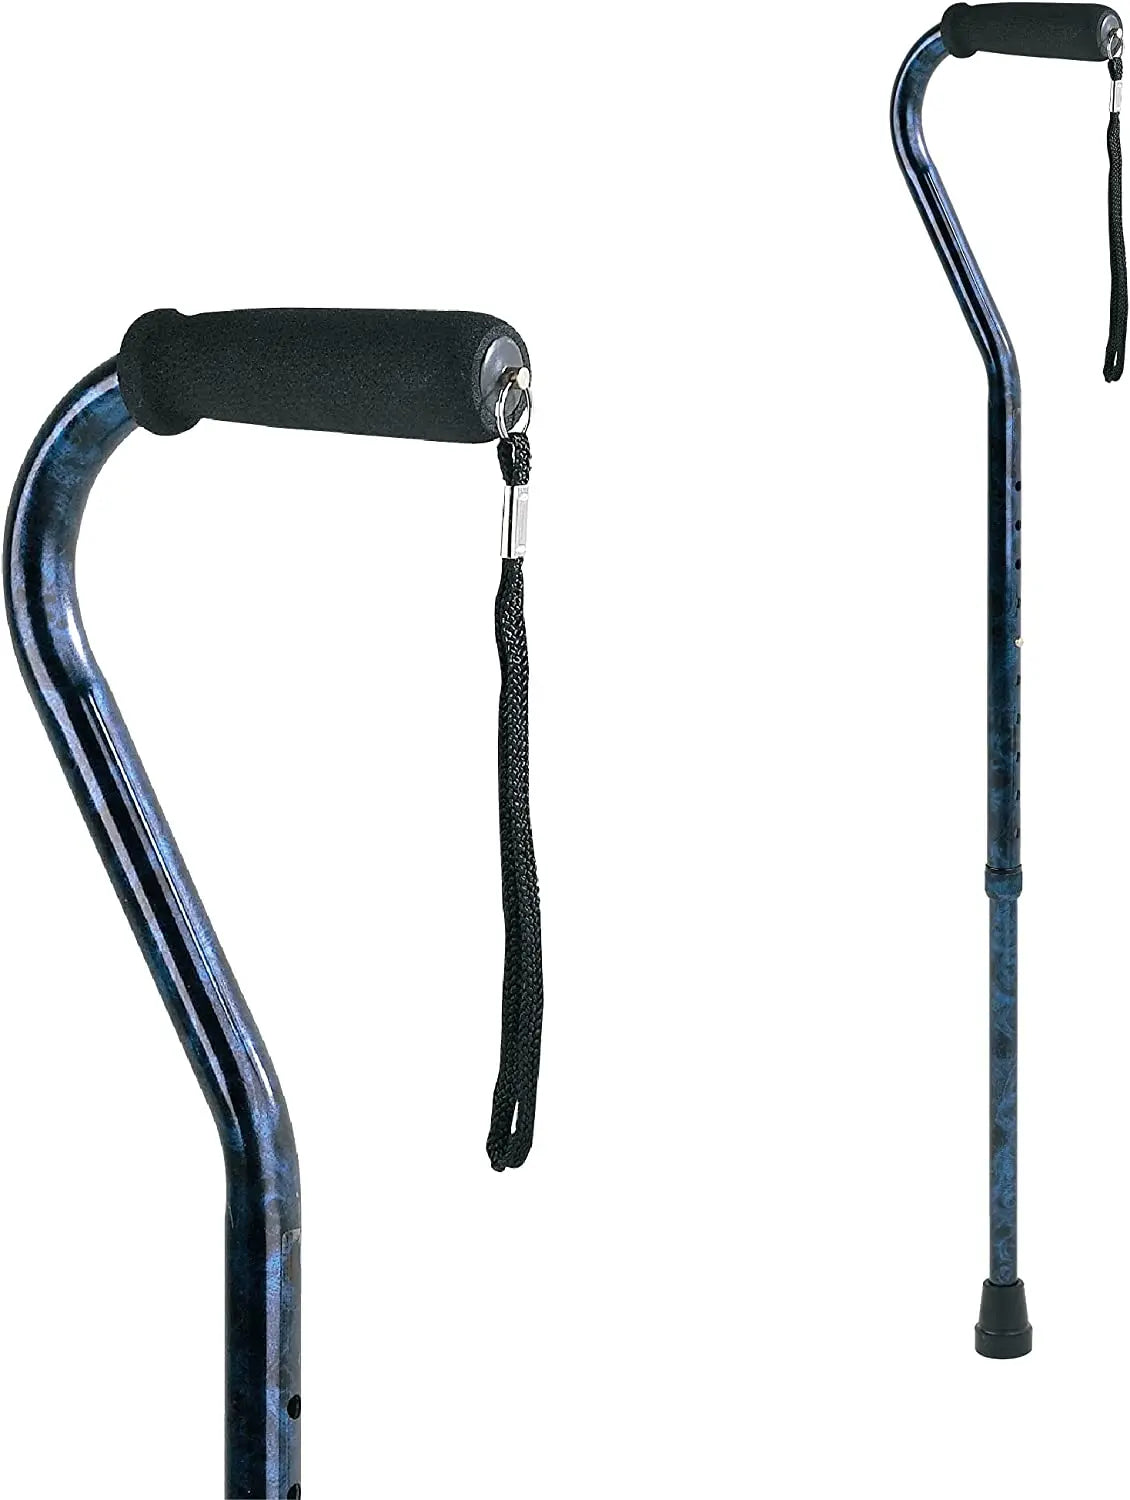 Offset Handle Cane W/Wrist Strap.Height 31-40in. Up To 250lbs Color:Canterbury(Non Ret) - Ea/1 - Home Health Store Inc